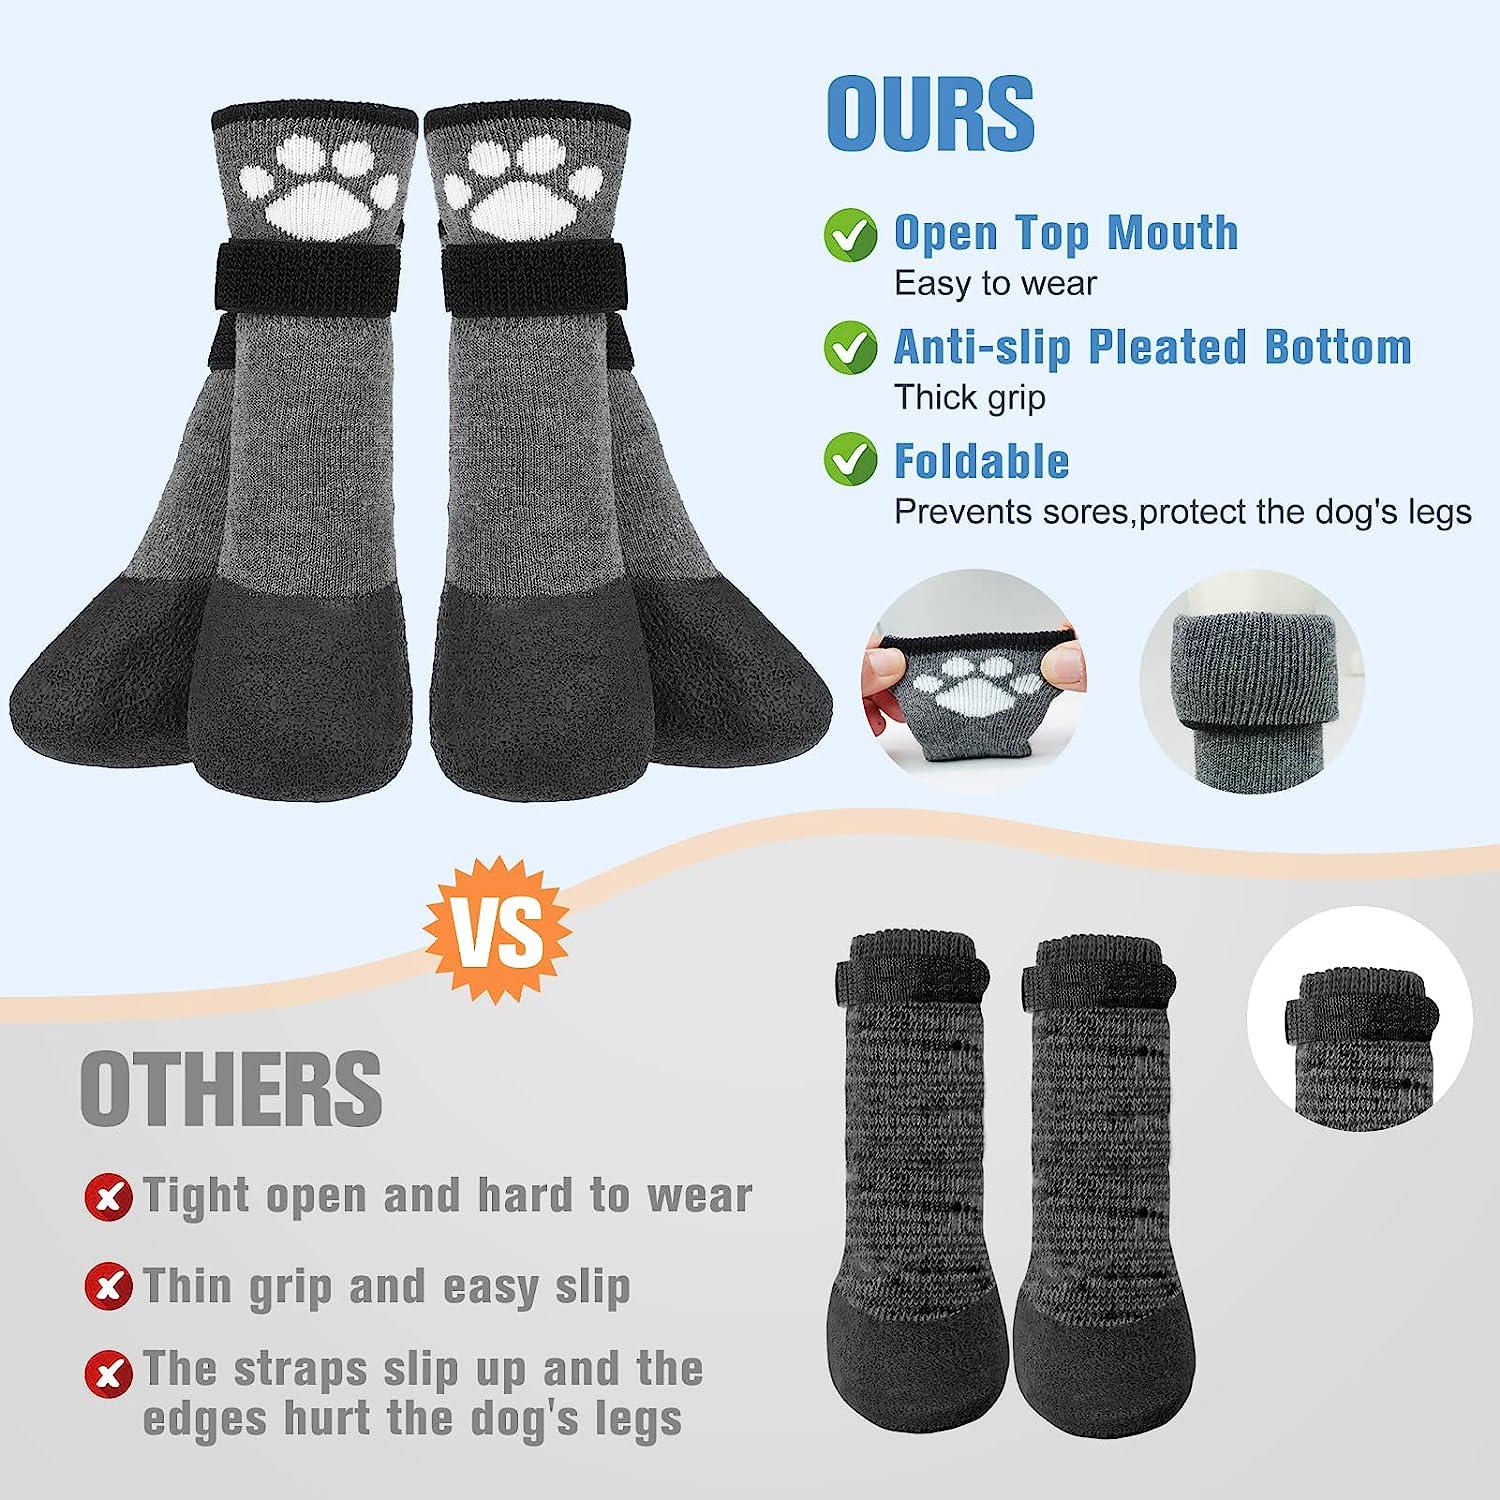 BEAUTYZOO Anti-Slip Dog Socks,Dog Shoes for Hot/Cold Pavement,Paw  Protectors with Grips 3 Pairs for Puppy Small Medium Large Senior Old  Dogs,Dog Socks